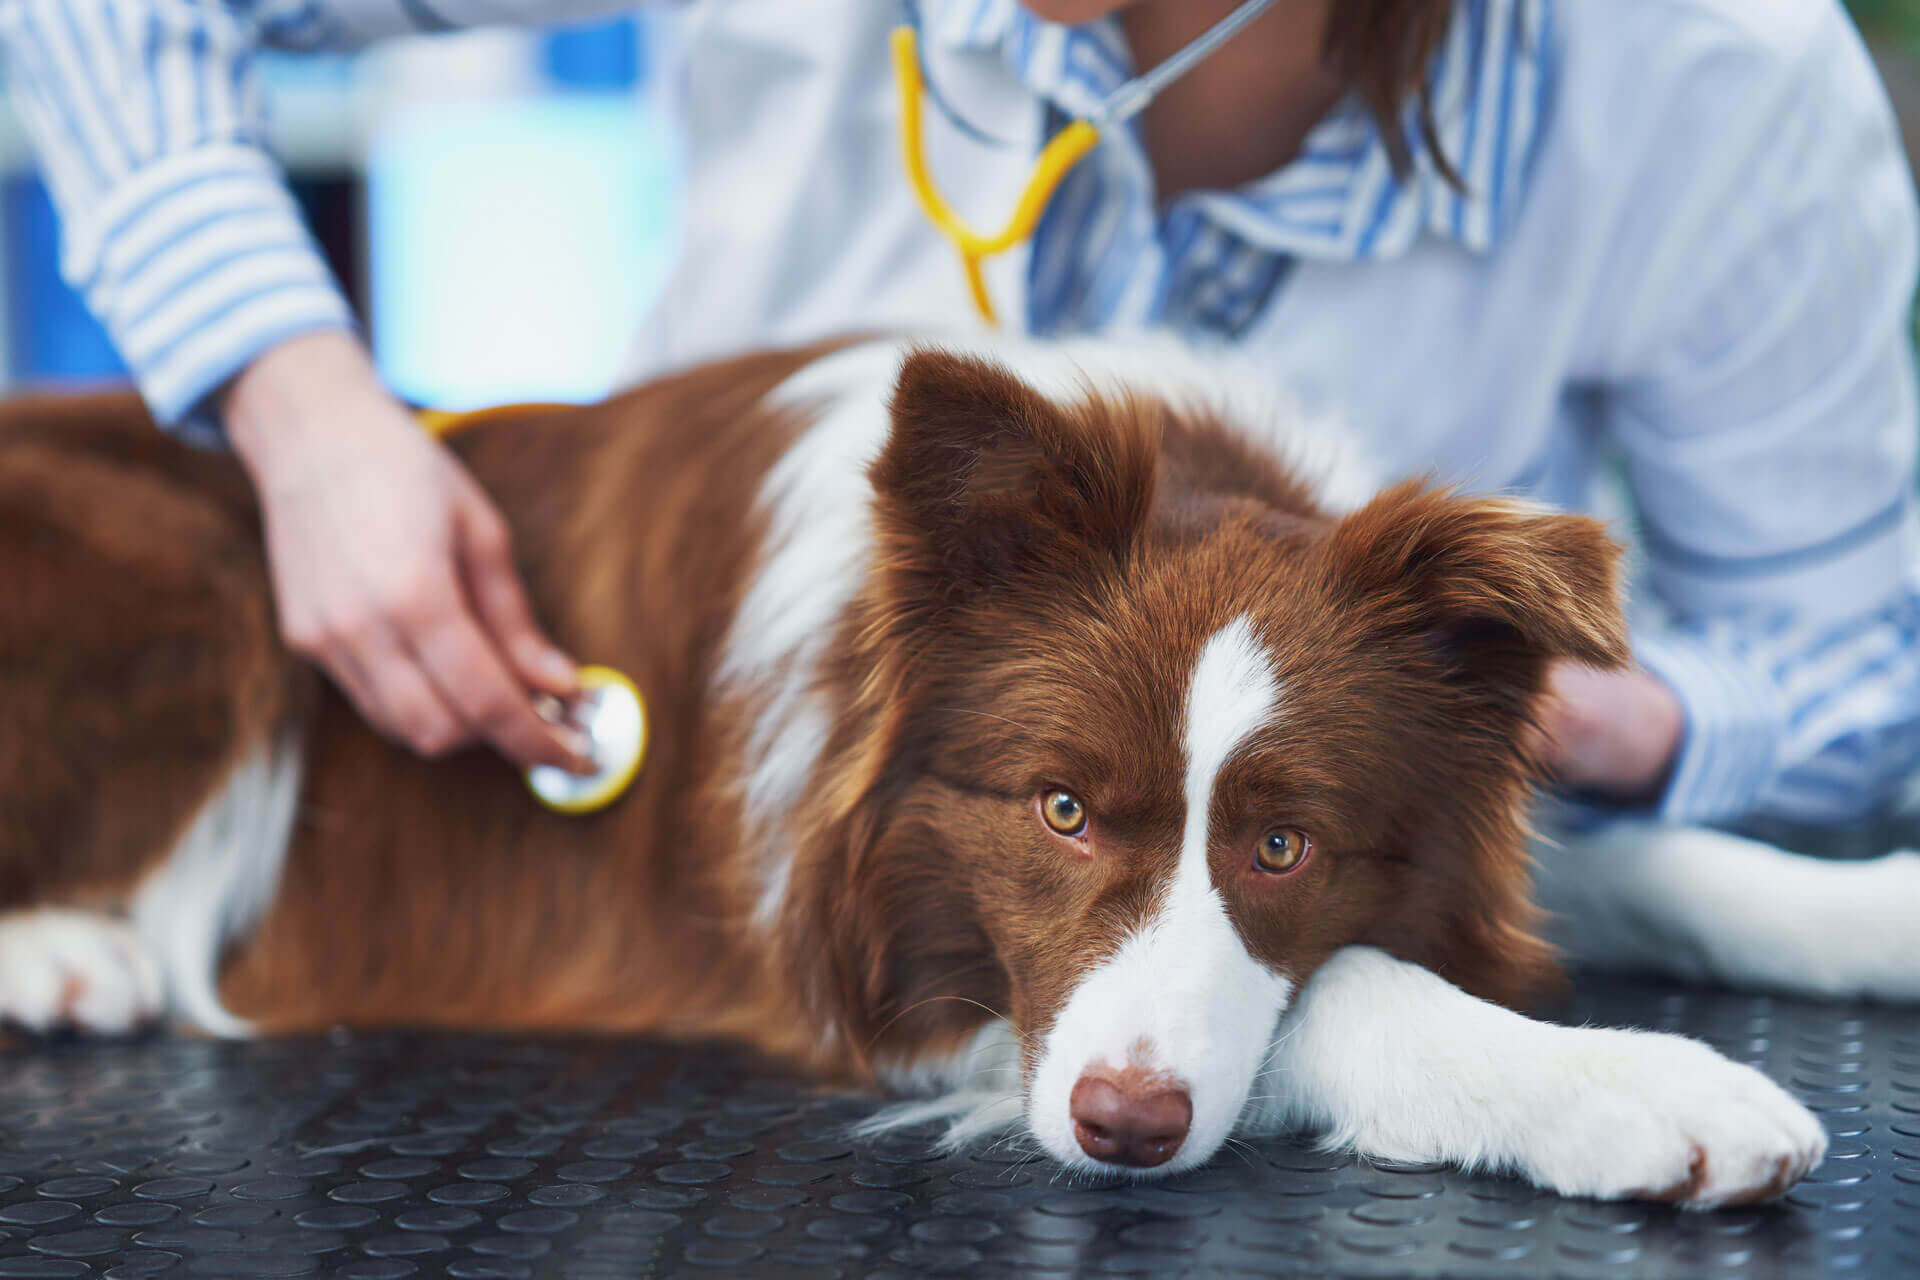 Dog Coughing And Gagging: Most Common Causes, Symptoms And Treatment